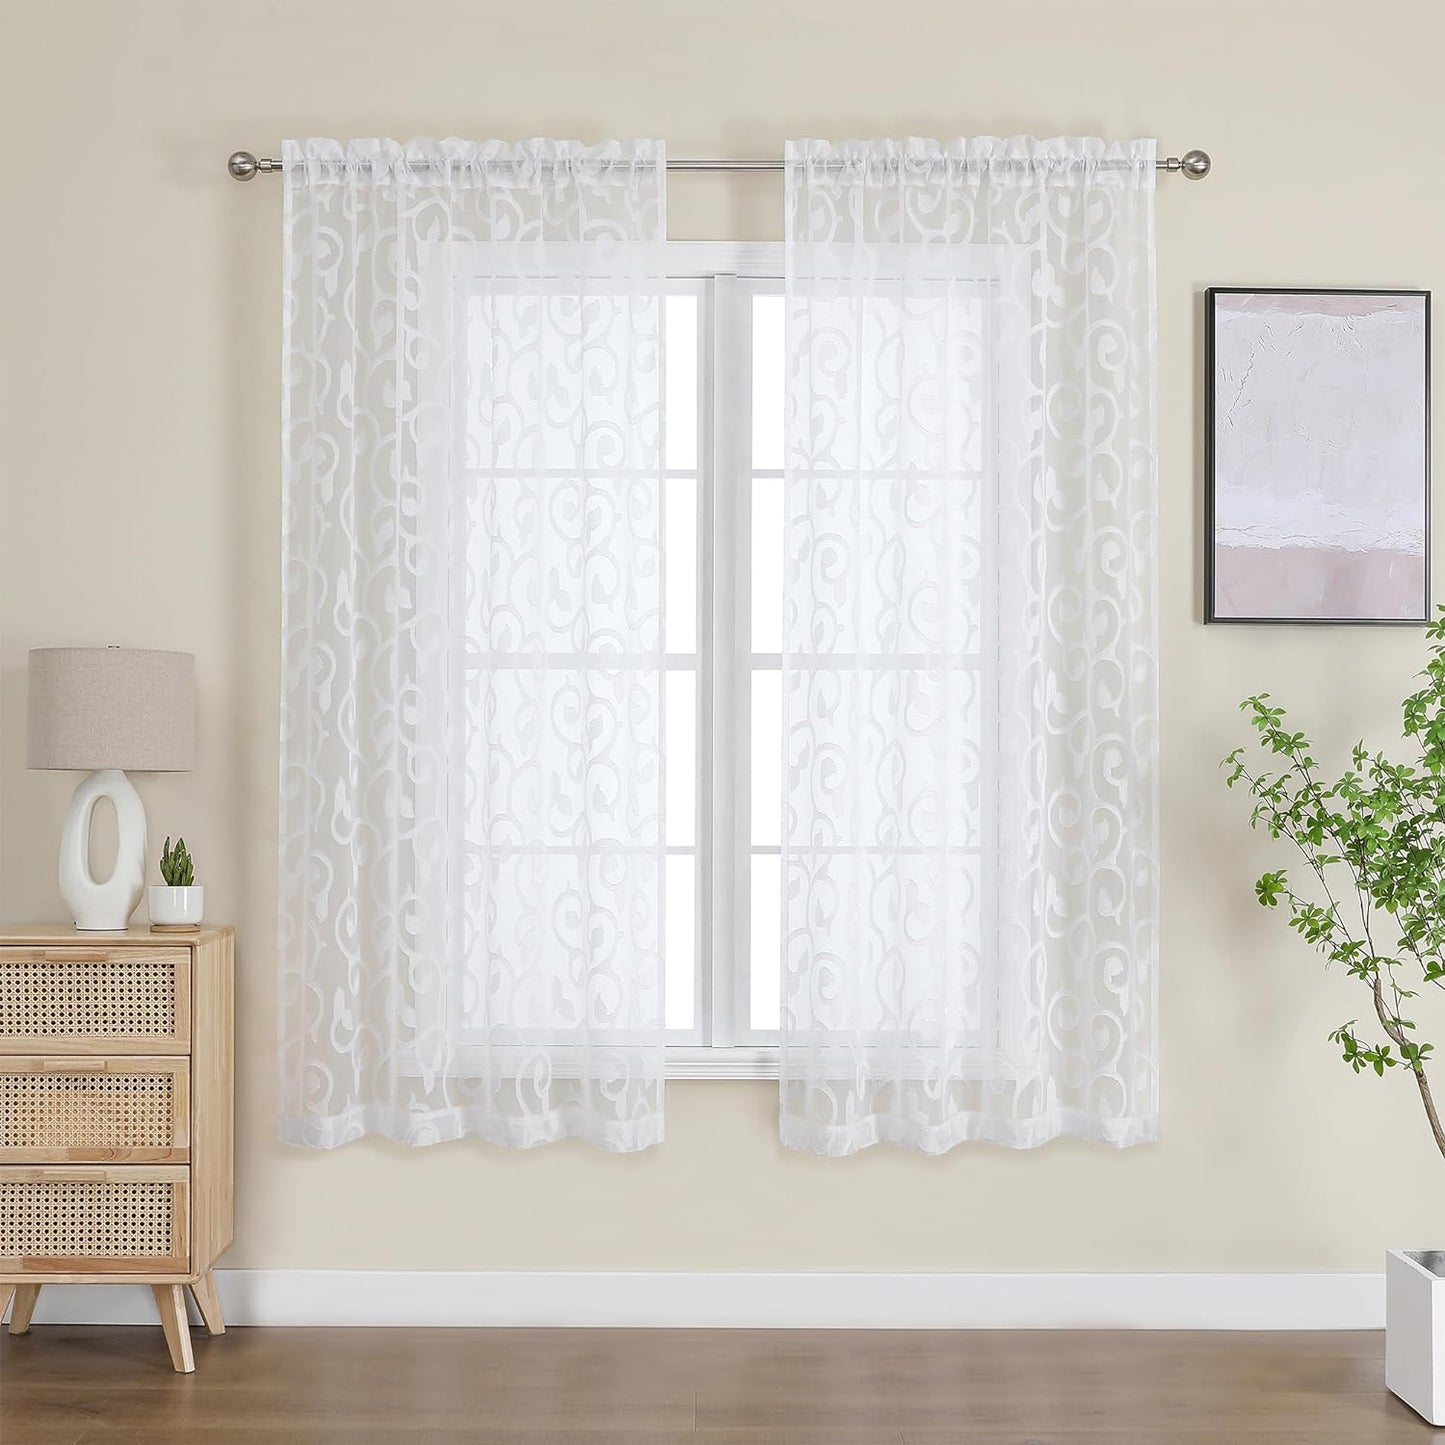 OWENIE Furman Sheer Curtains 84 Inches Long for Bedroom Living Room 2 Panels Set, Light Filtering Window Curtains, Semi Transparent Voile Top Dual Rod Pocket, Grey, 40Wx84L Inch, Total 84 Inches Width  OWENIE White 40W X 63L 